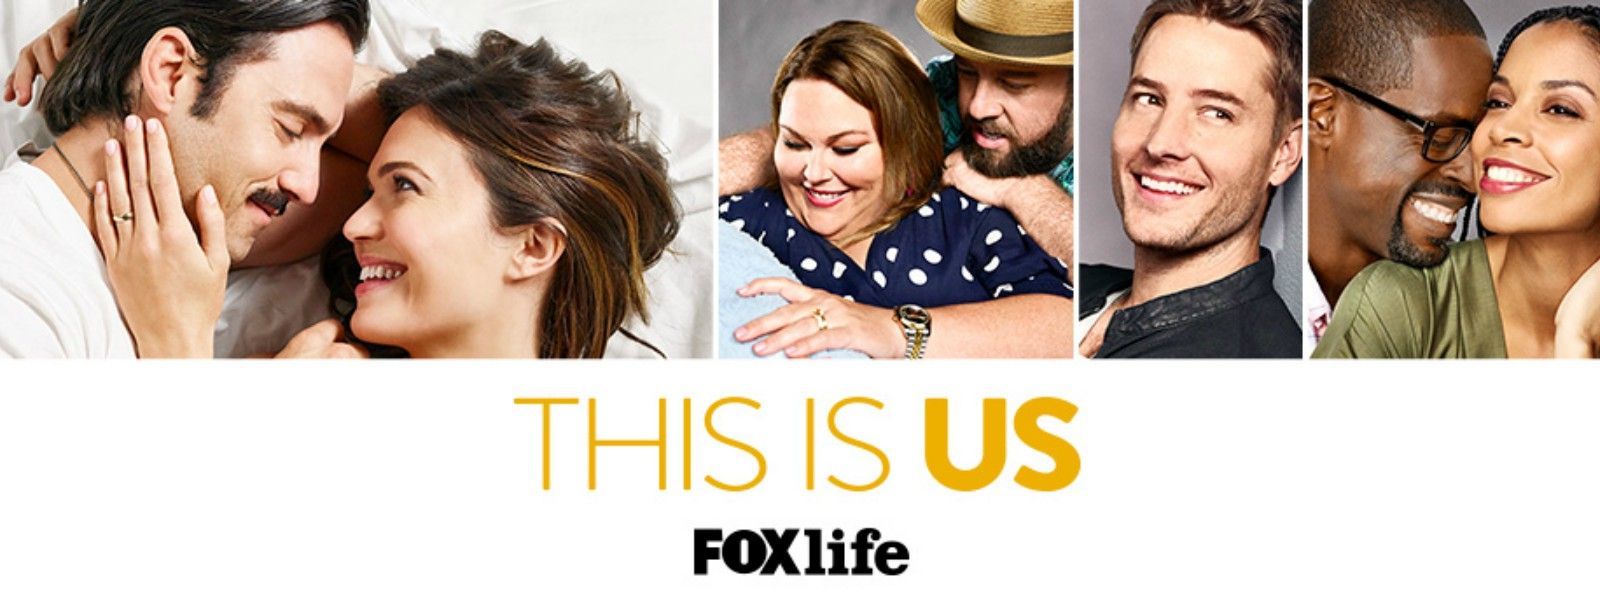 images easyblog articles 9943 THIS IS US FOX LIFE 48c84a3e